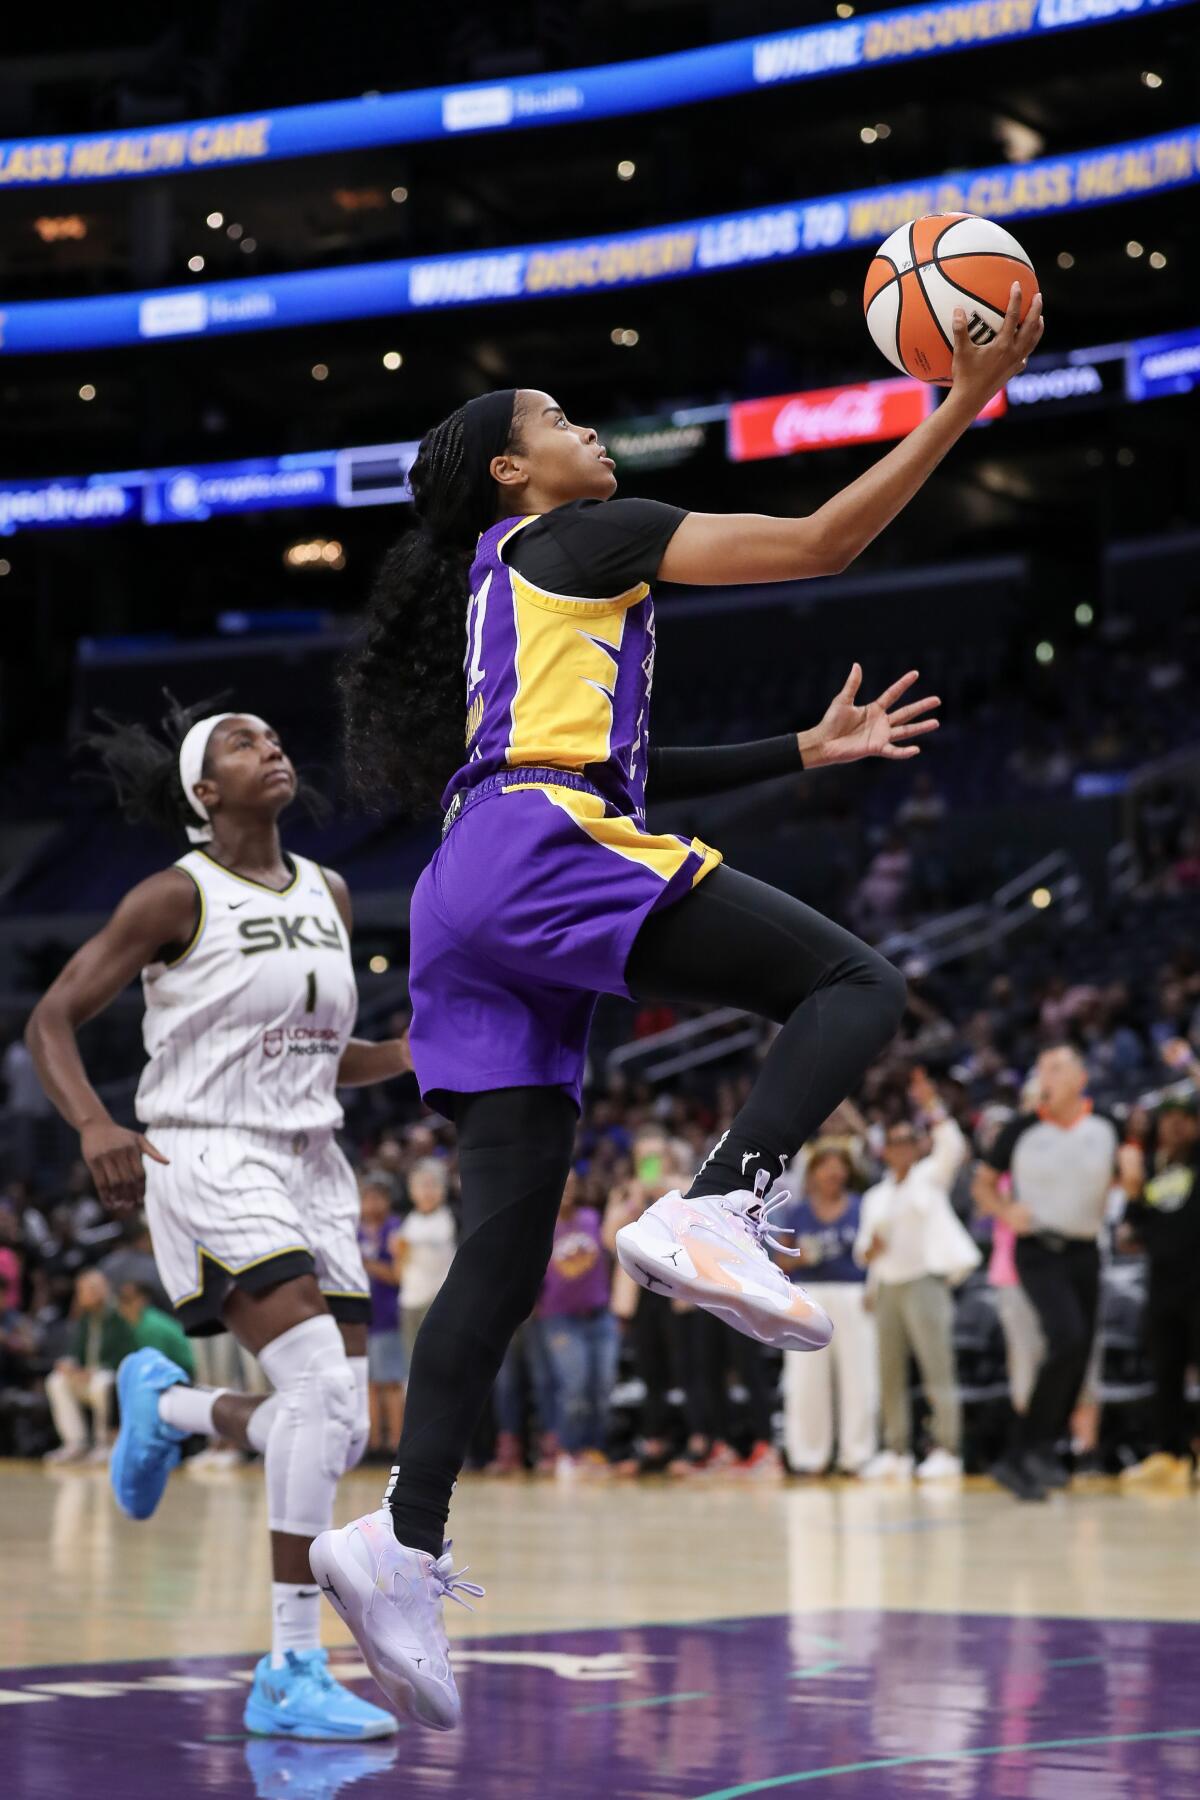 Chiney Ogwumike (13 Los Angeles Sparks) attempts a layup during the WNBA  basketball game between the Chicago Sky and Los Angeles Sparks on Friday  May 6th, 2022 at Wintrust Arena, Chicago, USA. (